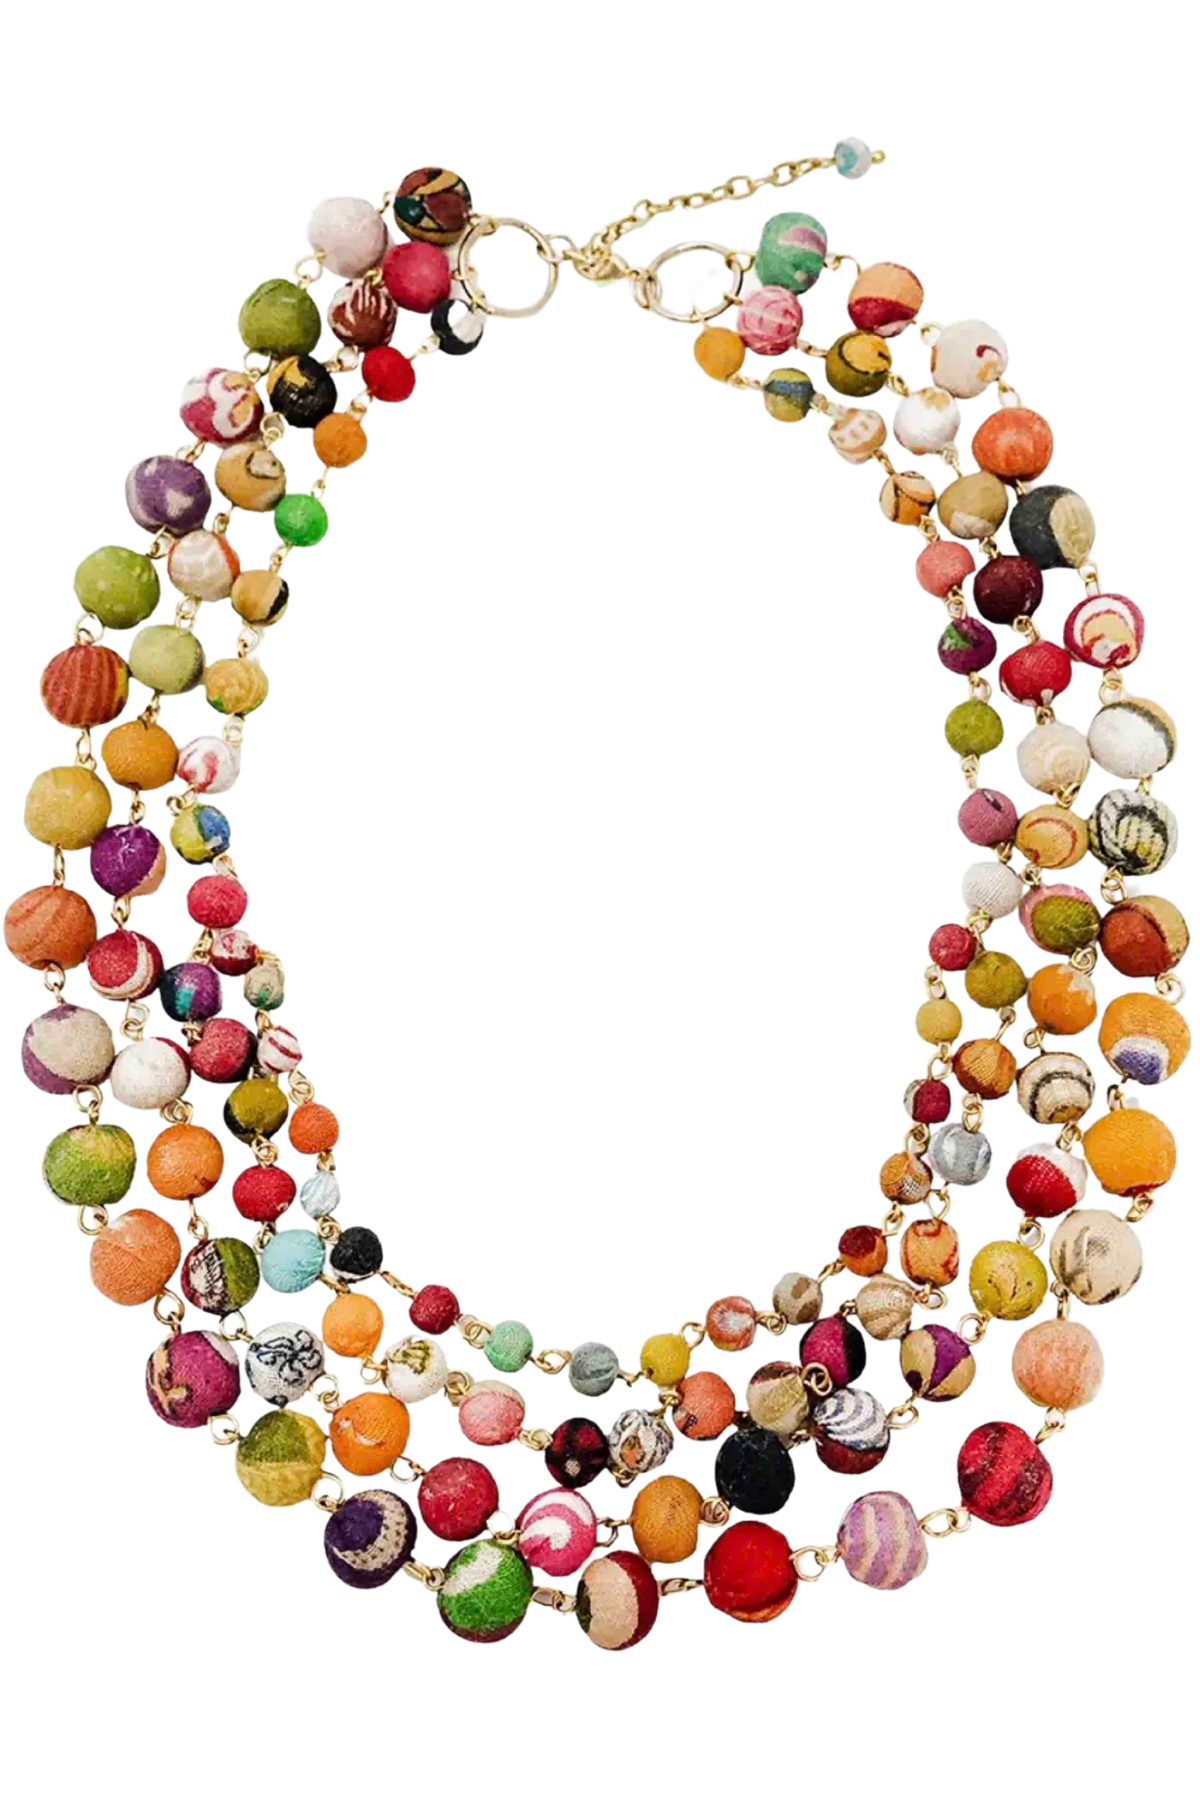 Multi colored Kantha Karita Necklace by Worlds Finds